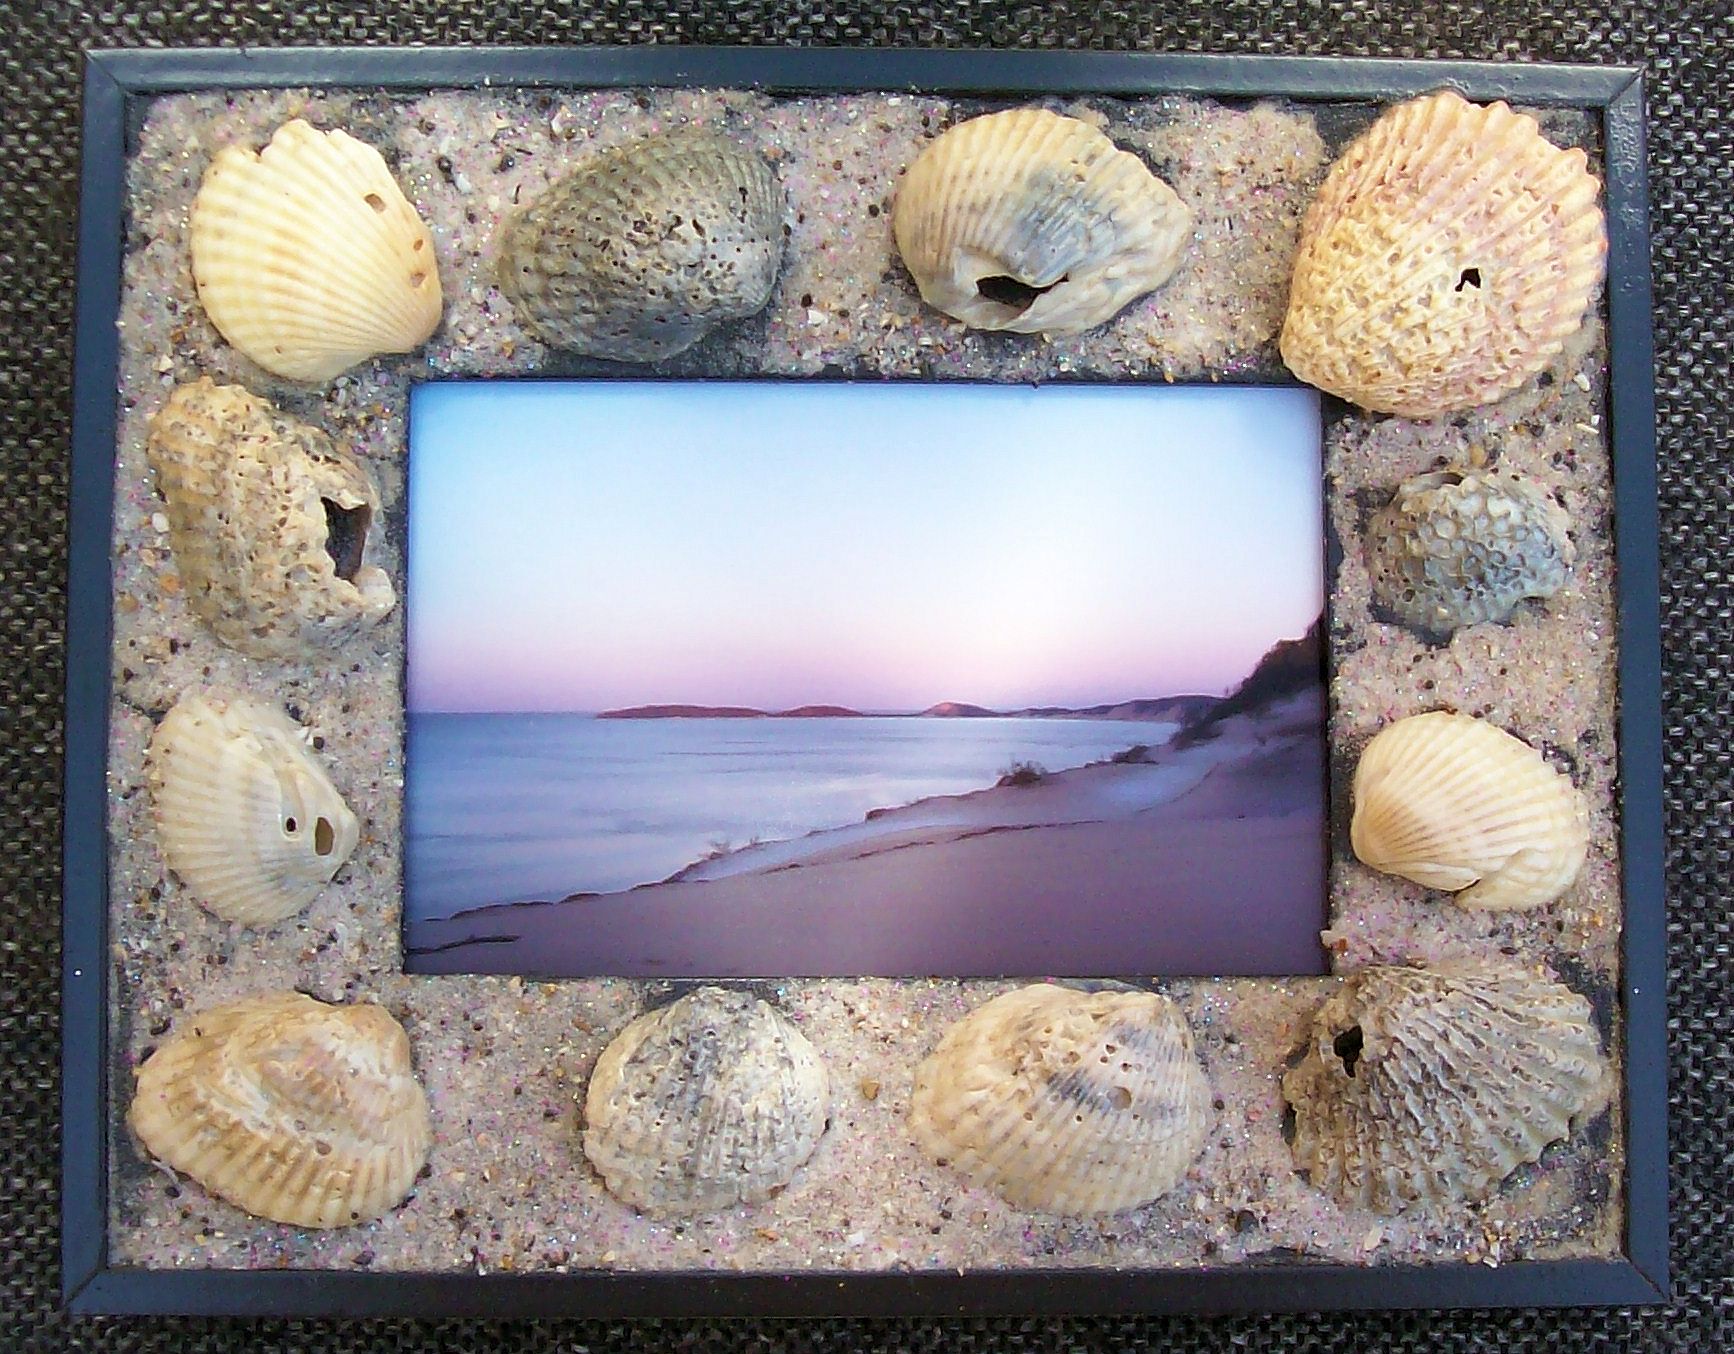 Broken shells and sand glued to picture frame.